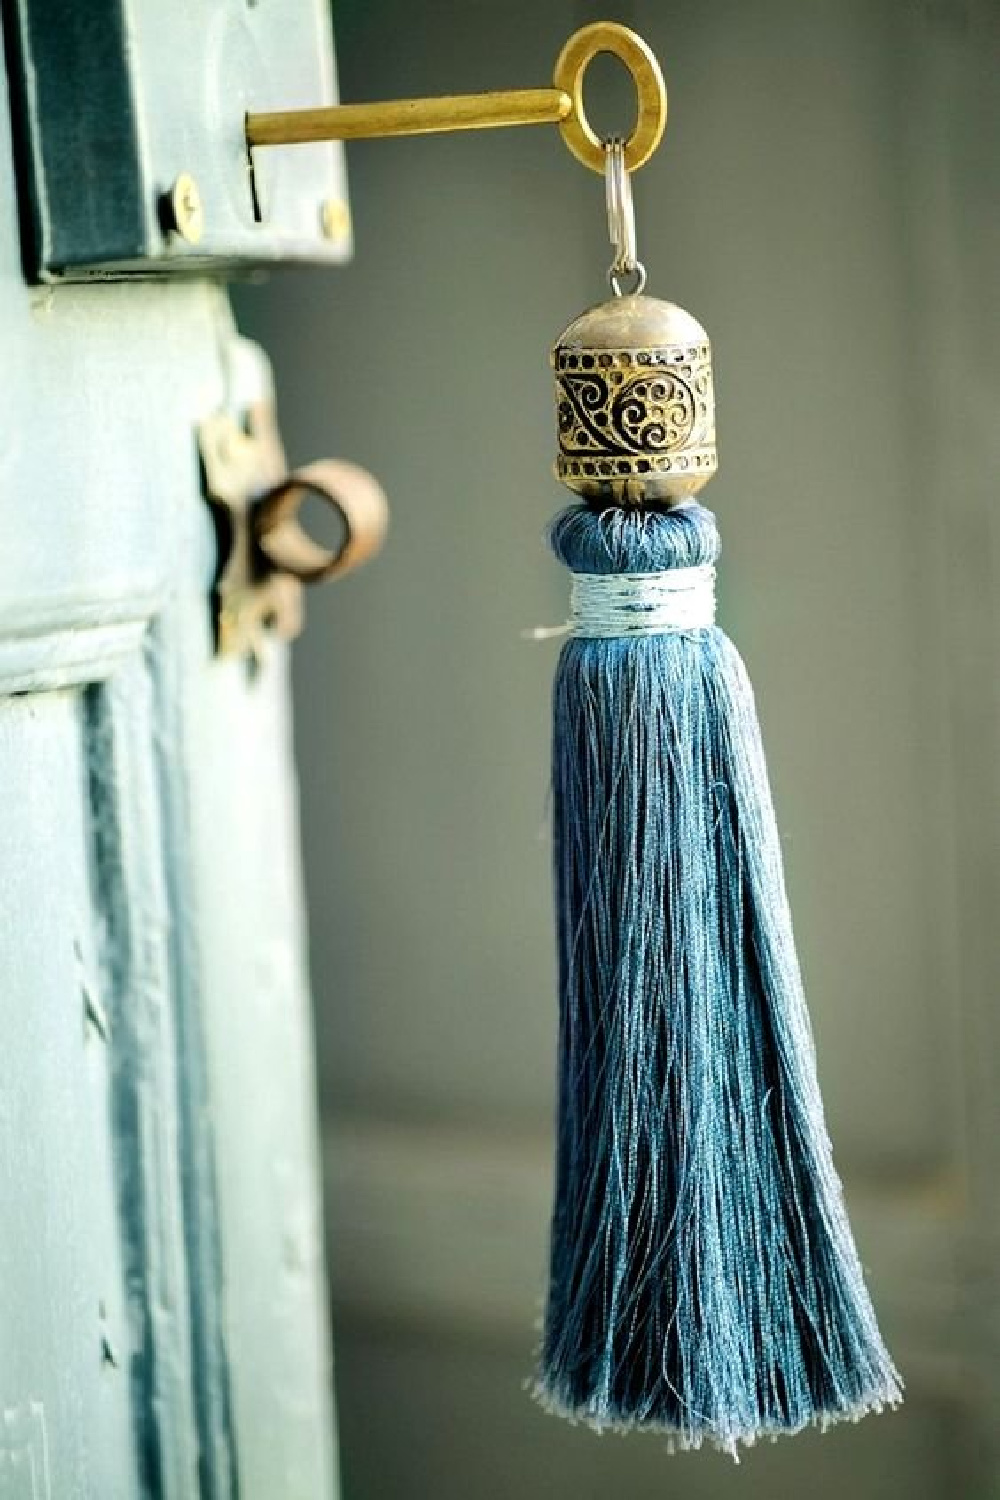 Turquoise tassel on a rustic painted cabinet - Amellye. #turquoise #tassels